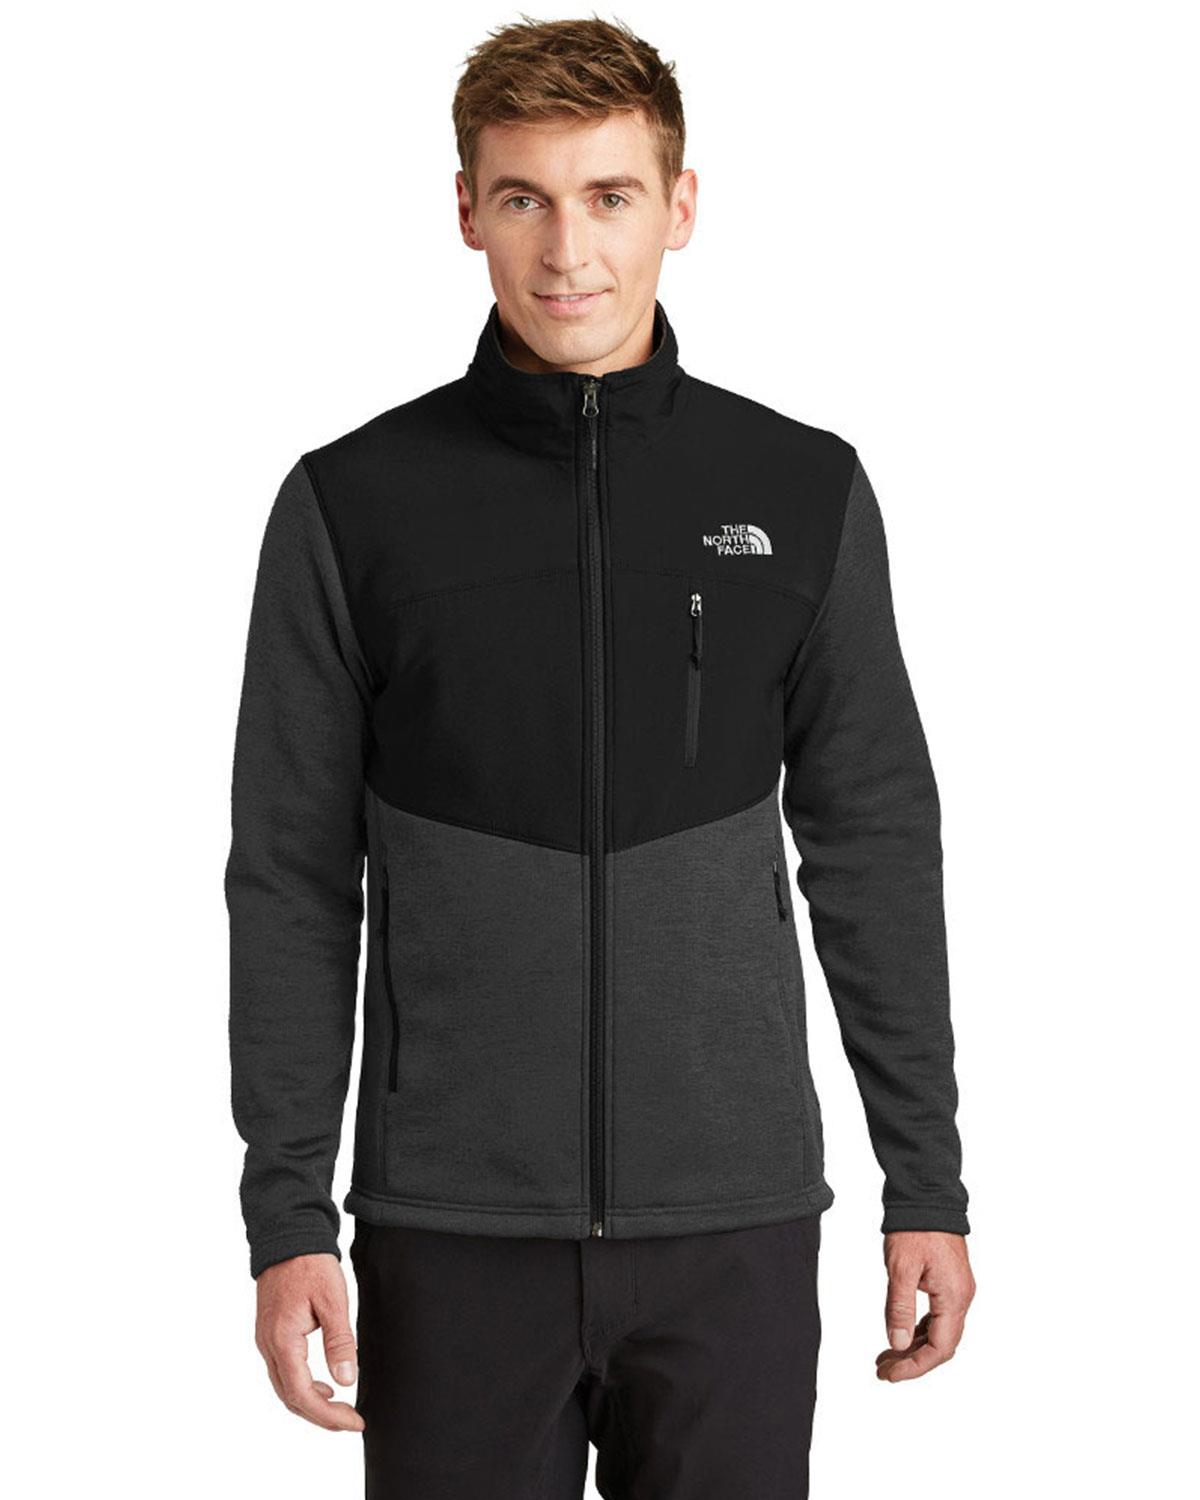 The North Face NF0A3LH6 Mens Jacket